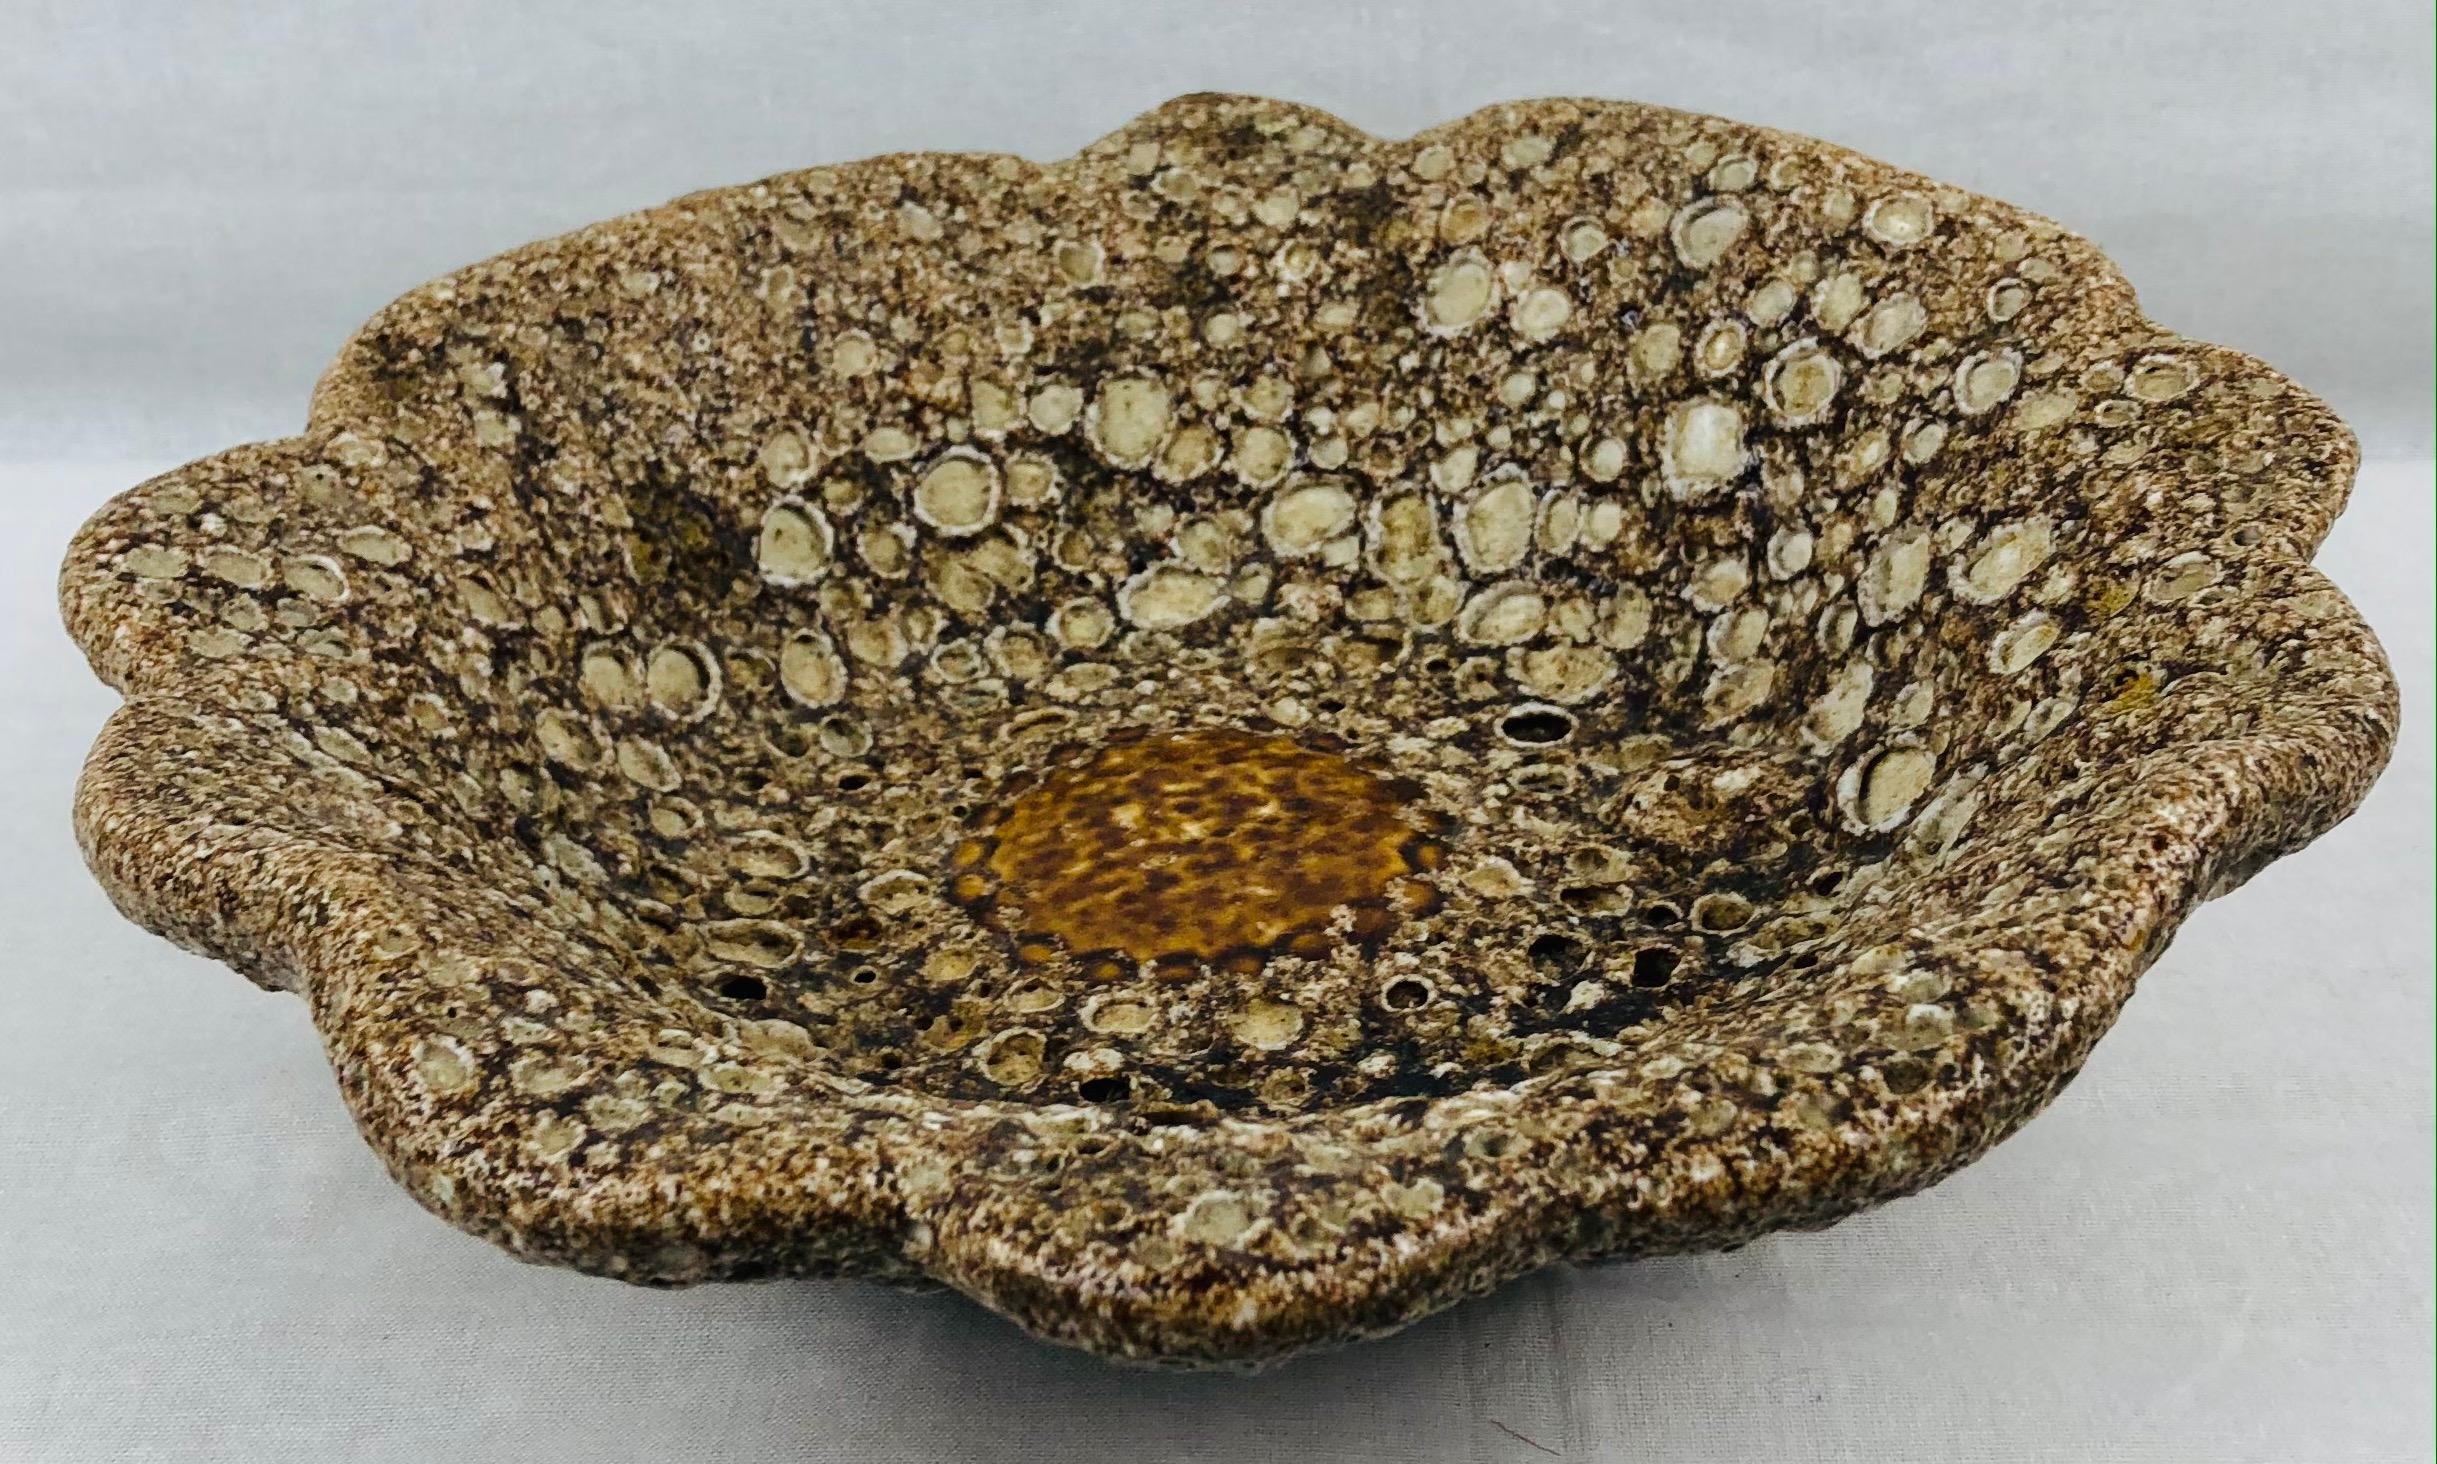 A wonderful decorative bowl from Vallauris made in the manner of Charles Cart's fat lava ceramics. 

The firing process reveals the multiple layers below the multicolored glaze in a way which suggests lava or glaciers. Will enhance the look of any